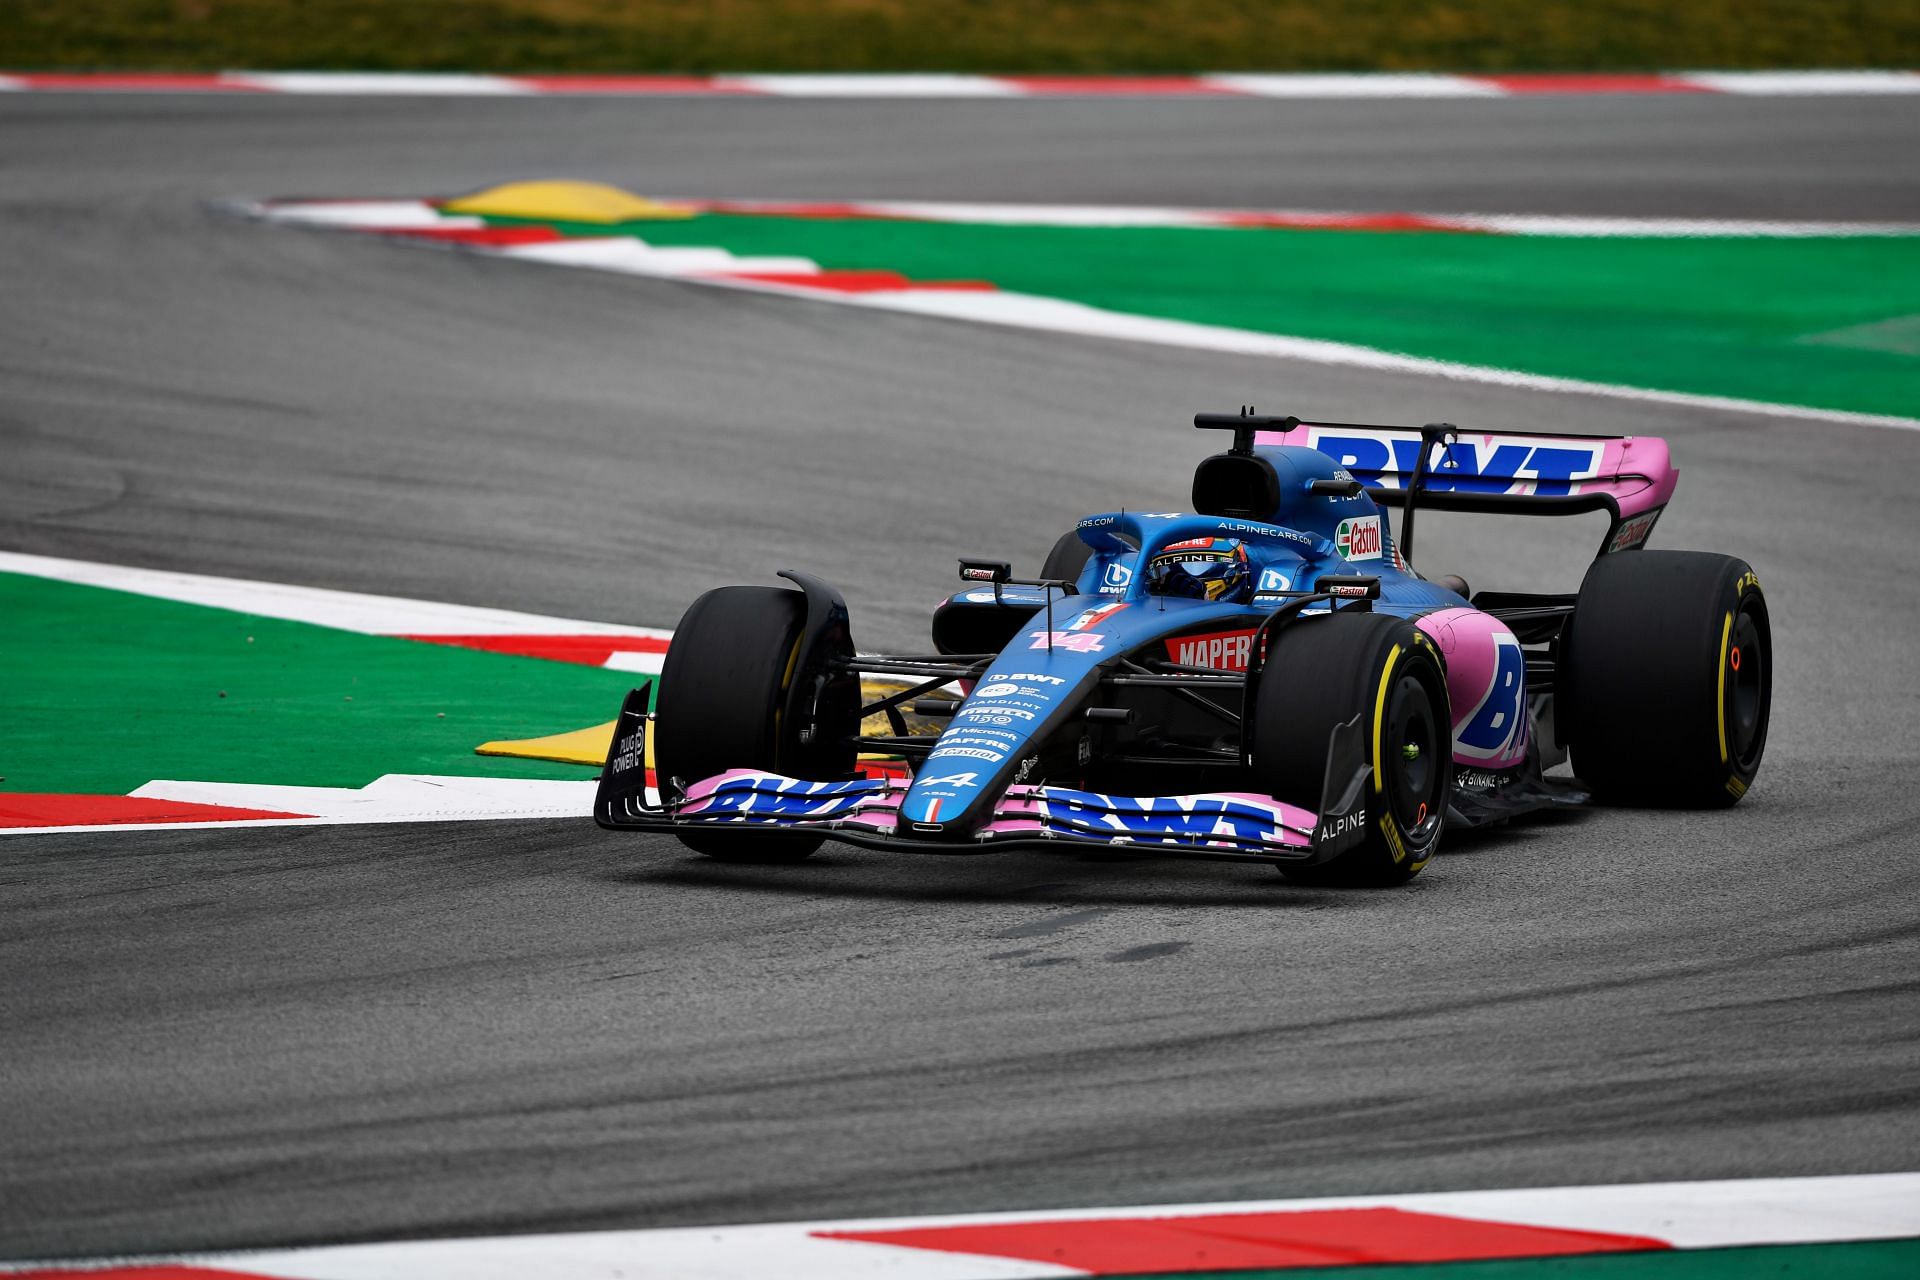 Fernando Alonso in action for Alpine during pre-seaosn testing in Barcelona (Photo by Rudy Carezzevoli/Getty Images)